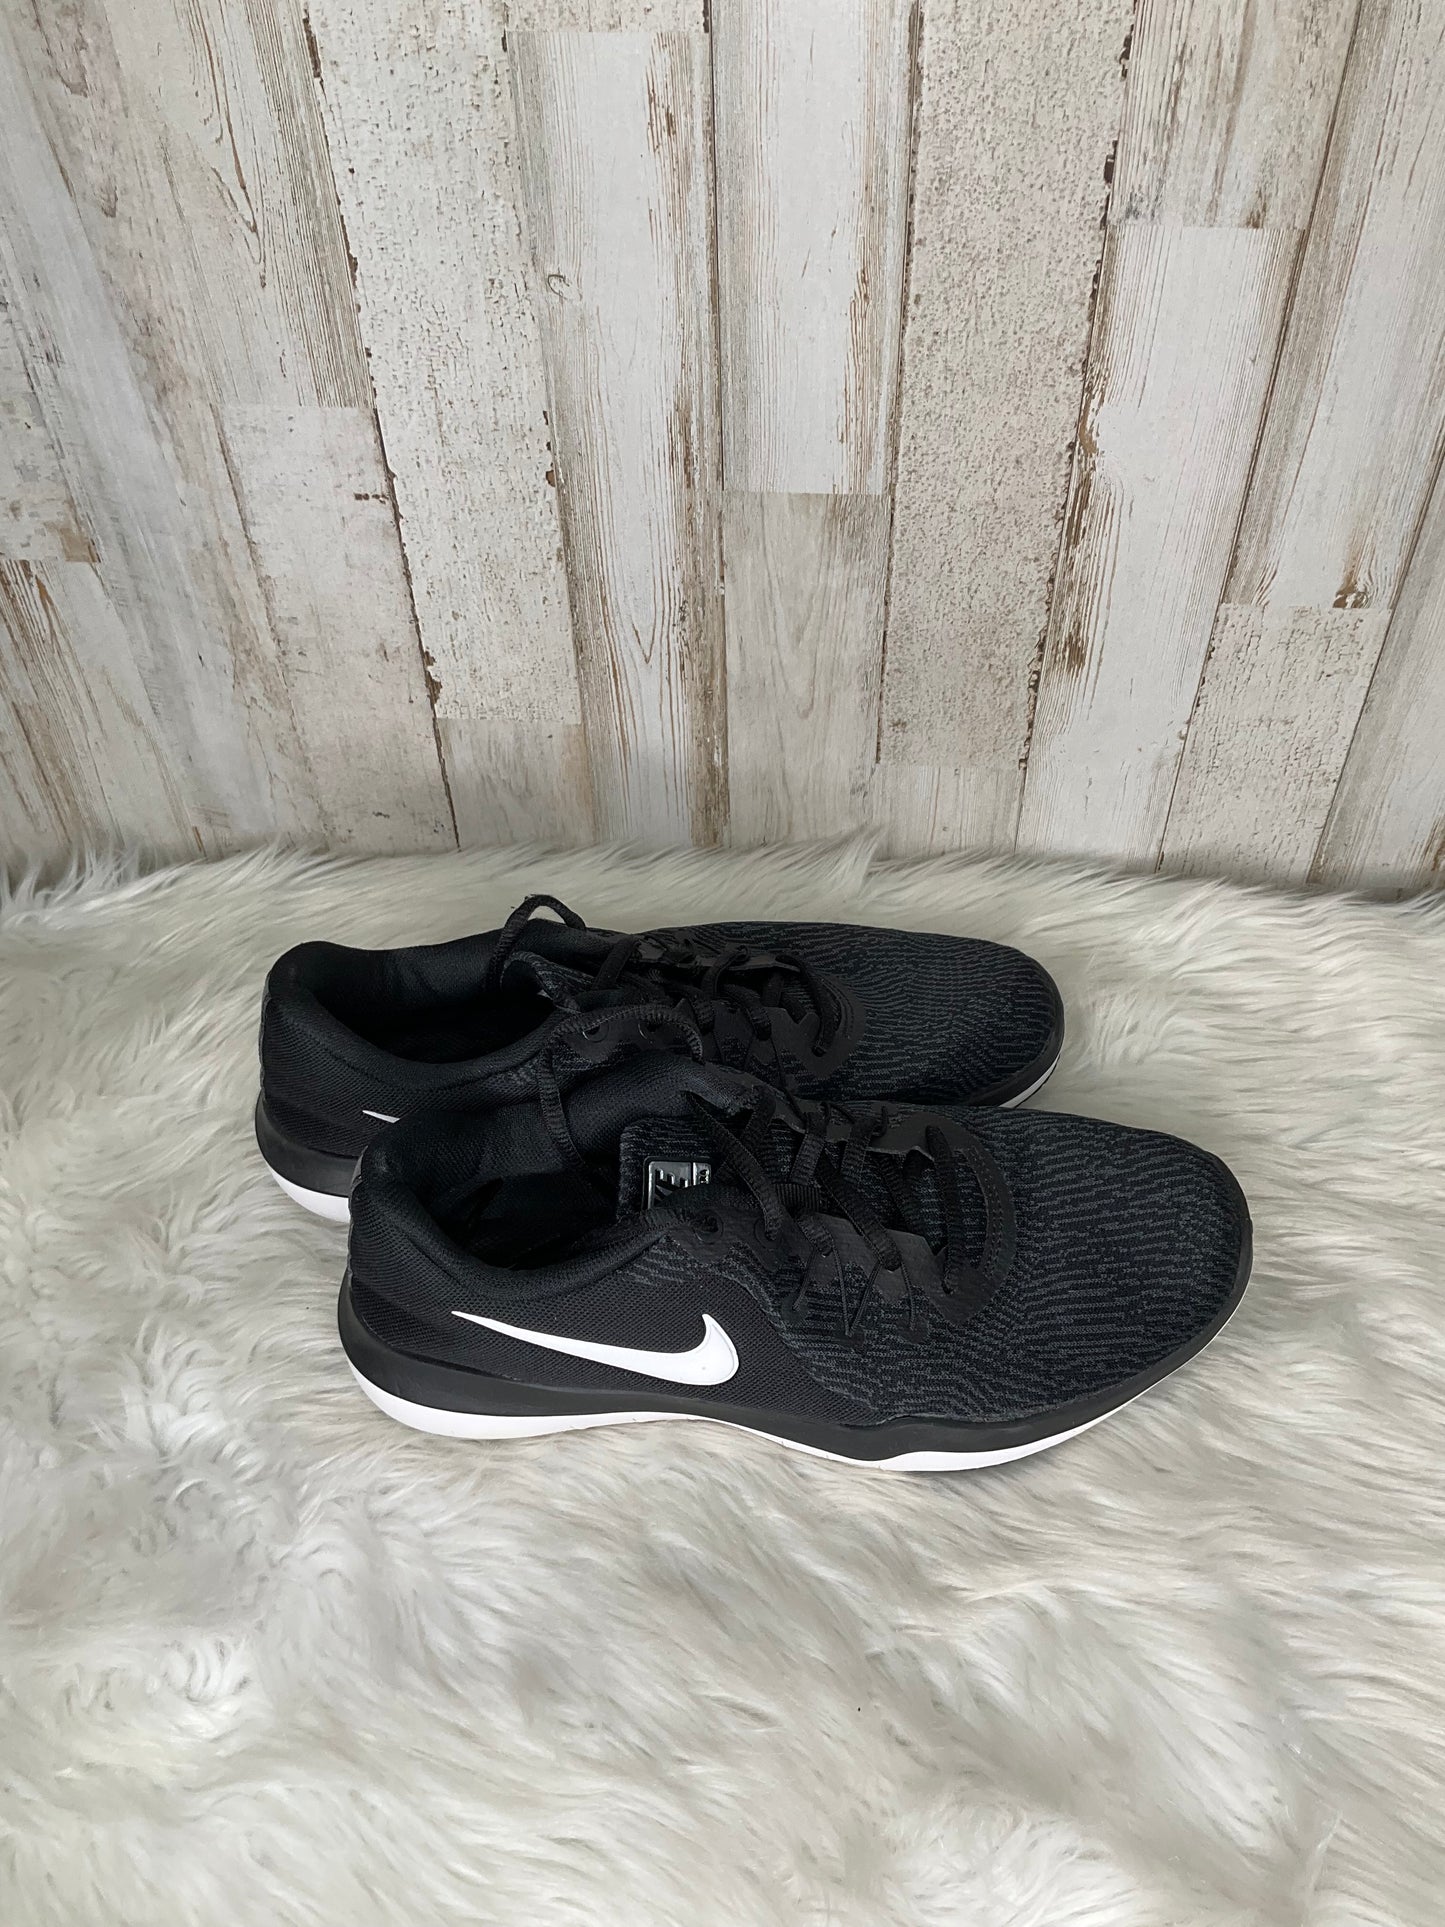 Shoes Athletic By Nike  Size: 8